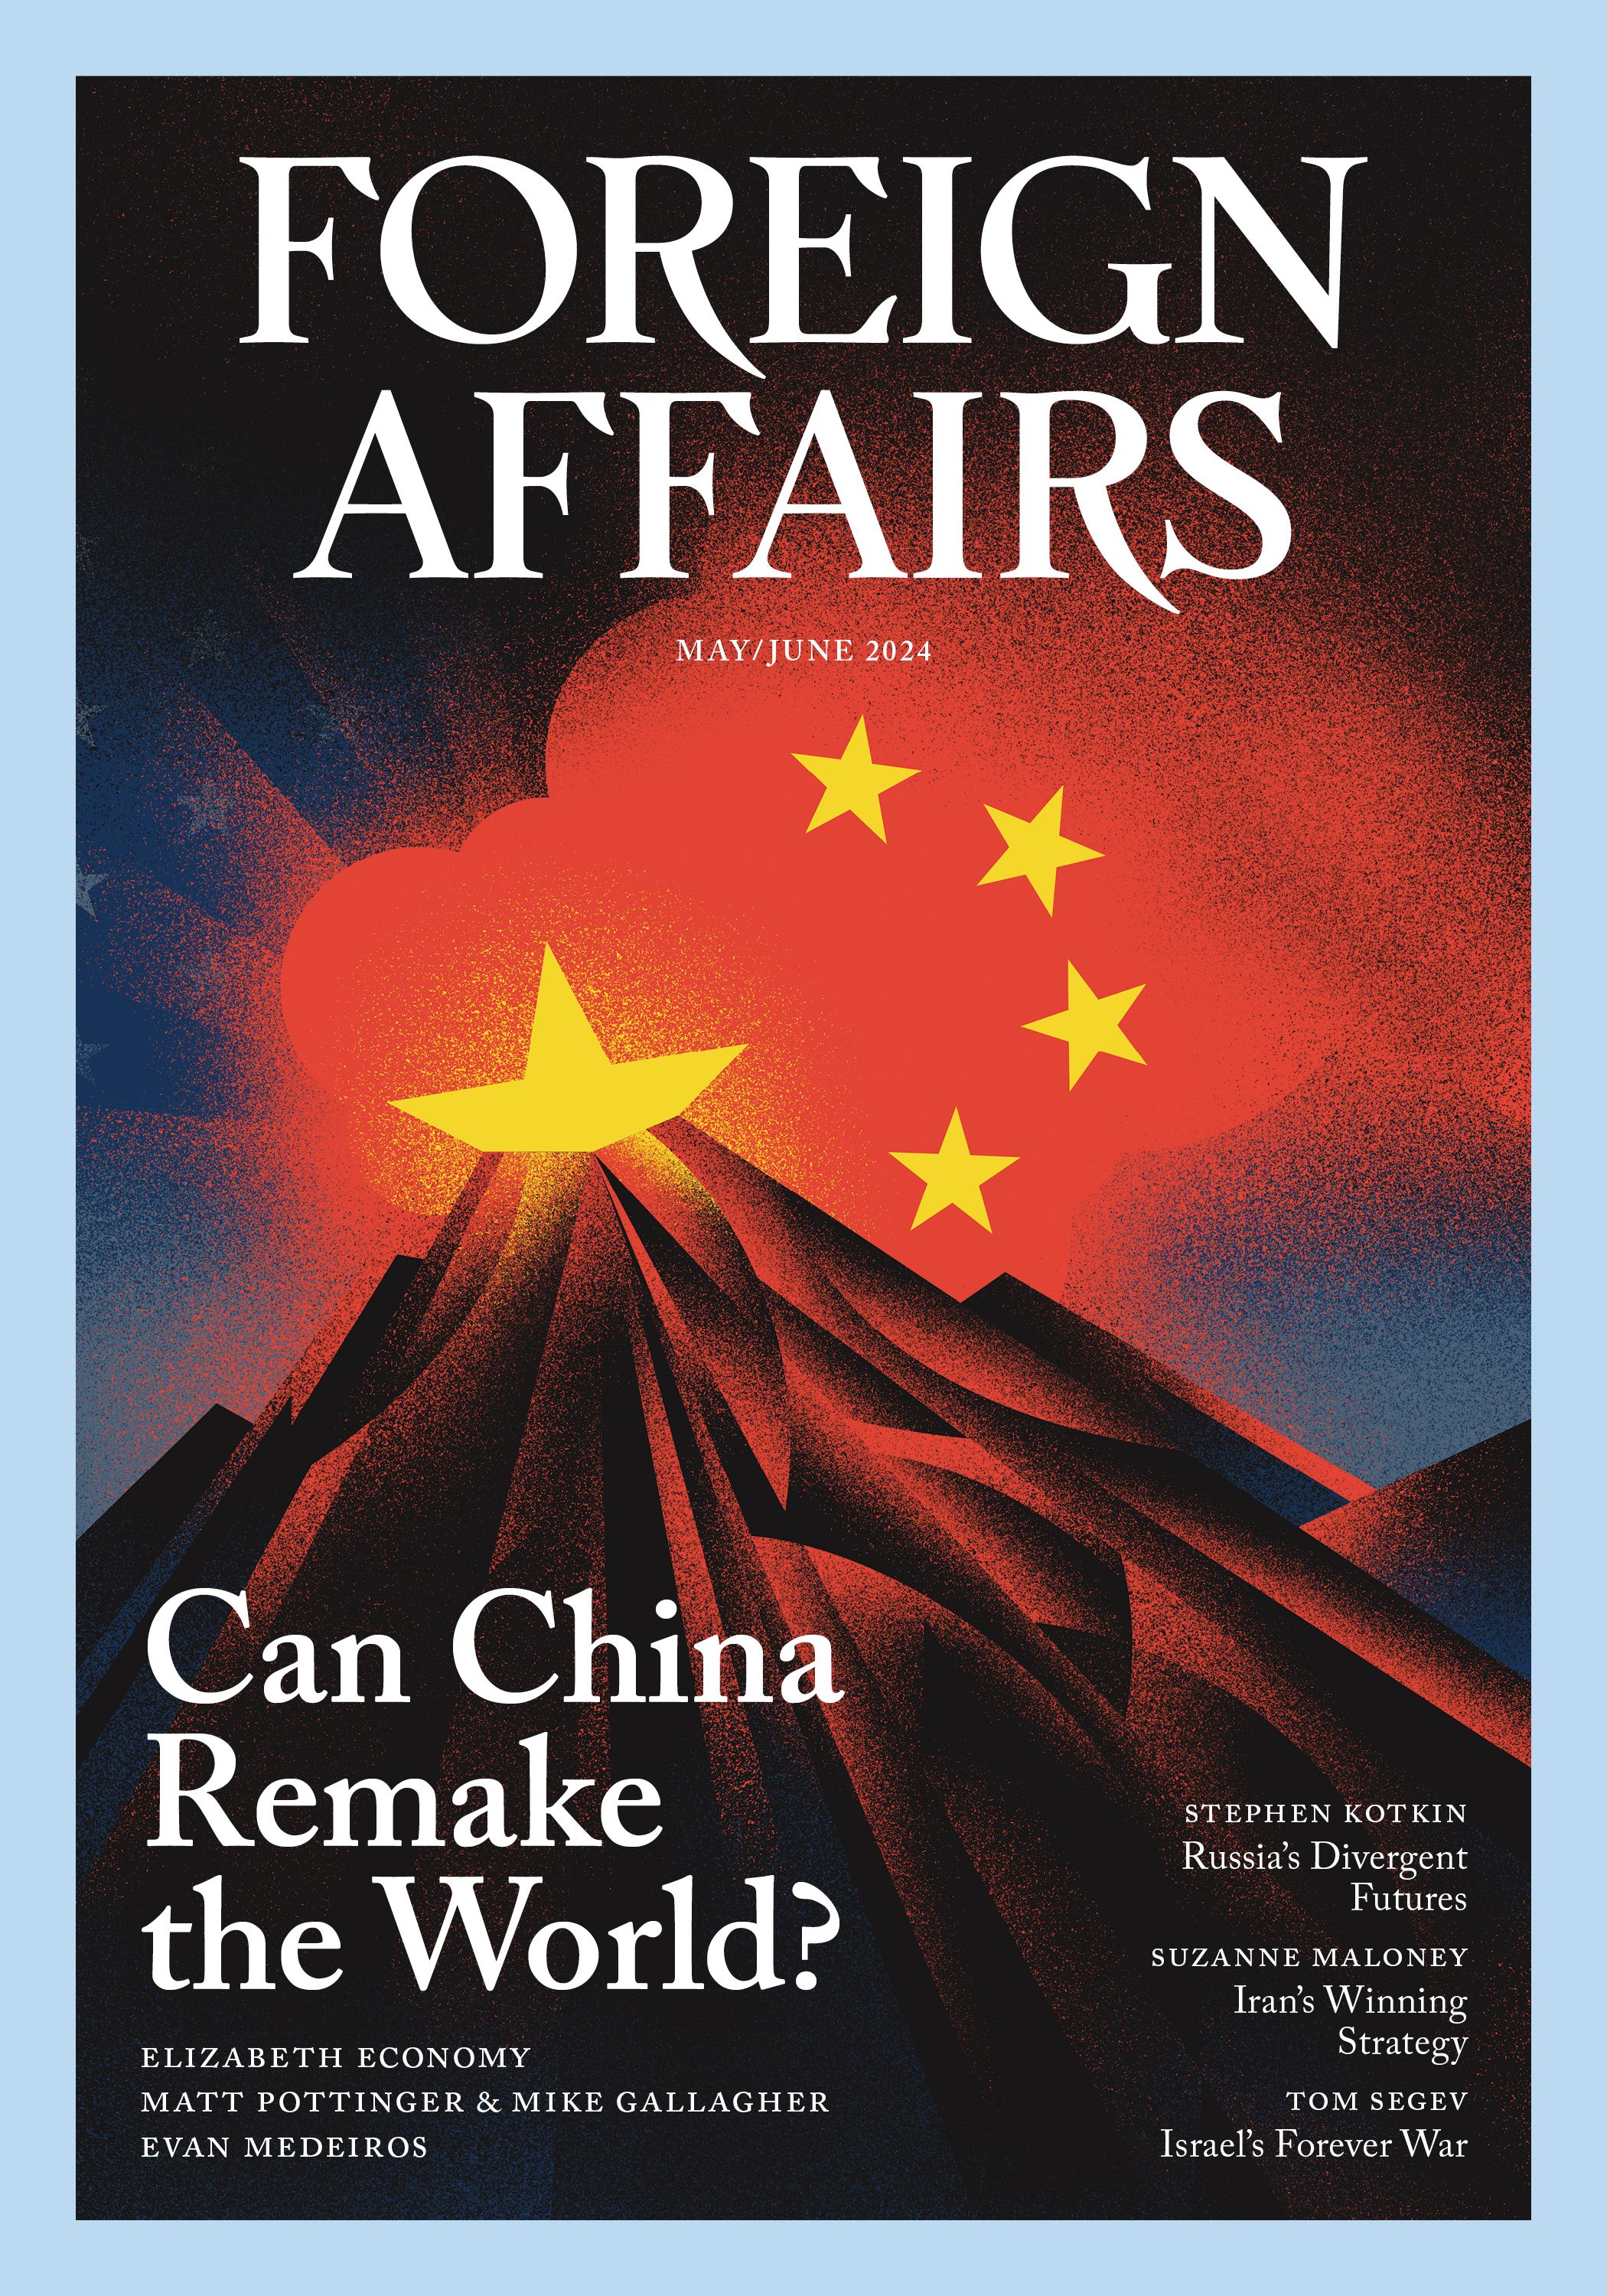 the May/June issue of Foreign Affairs Magazine